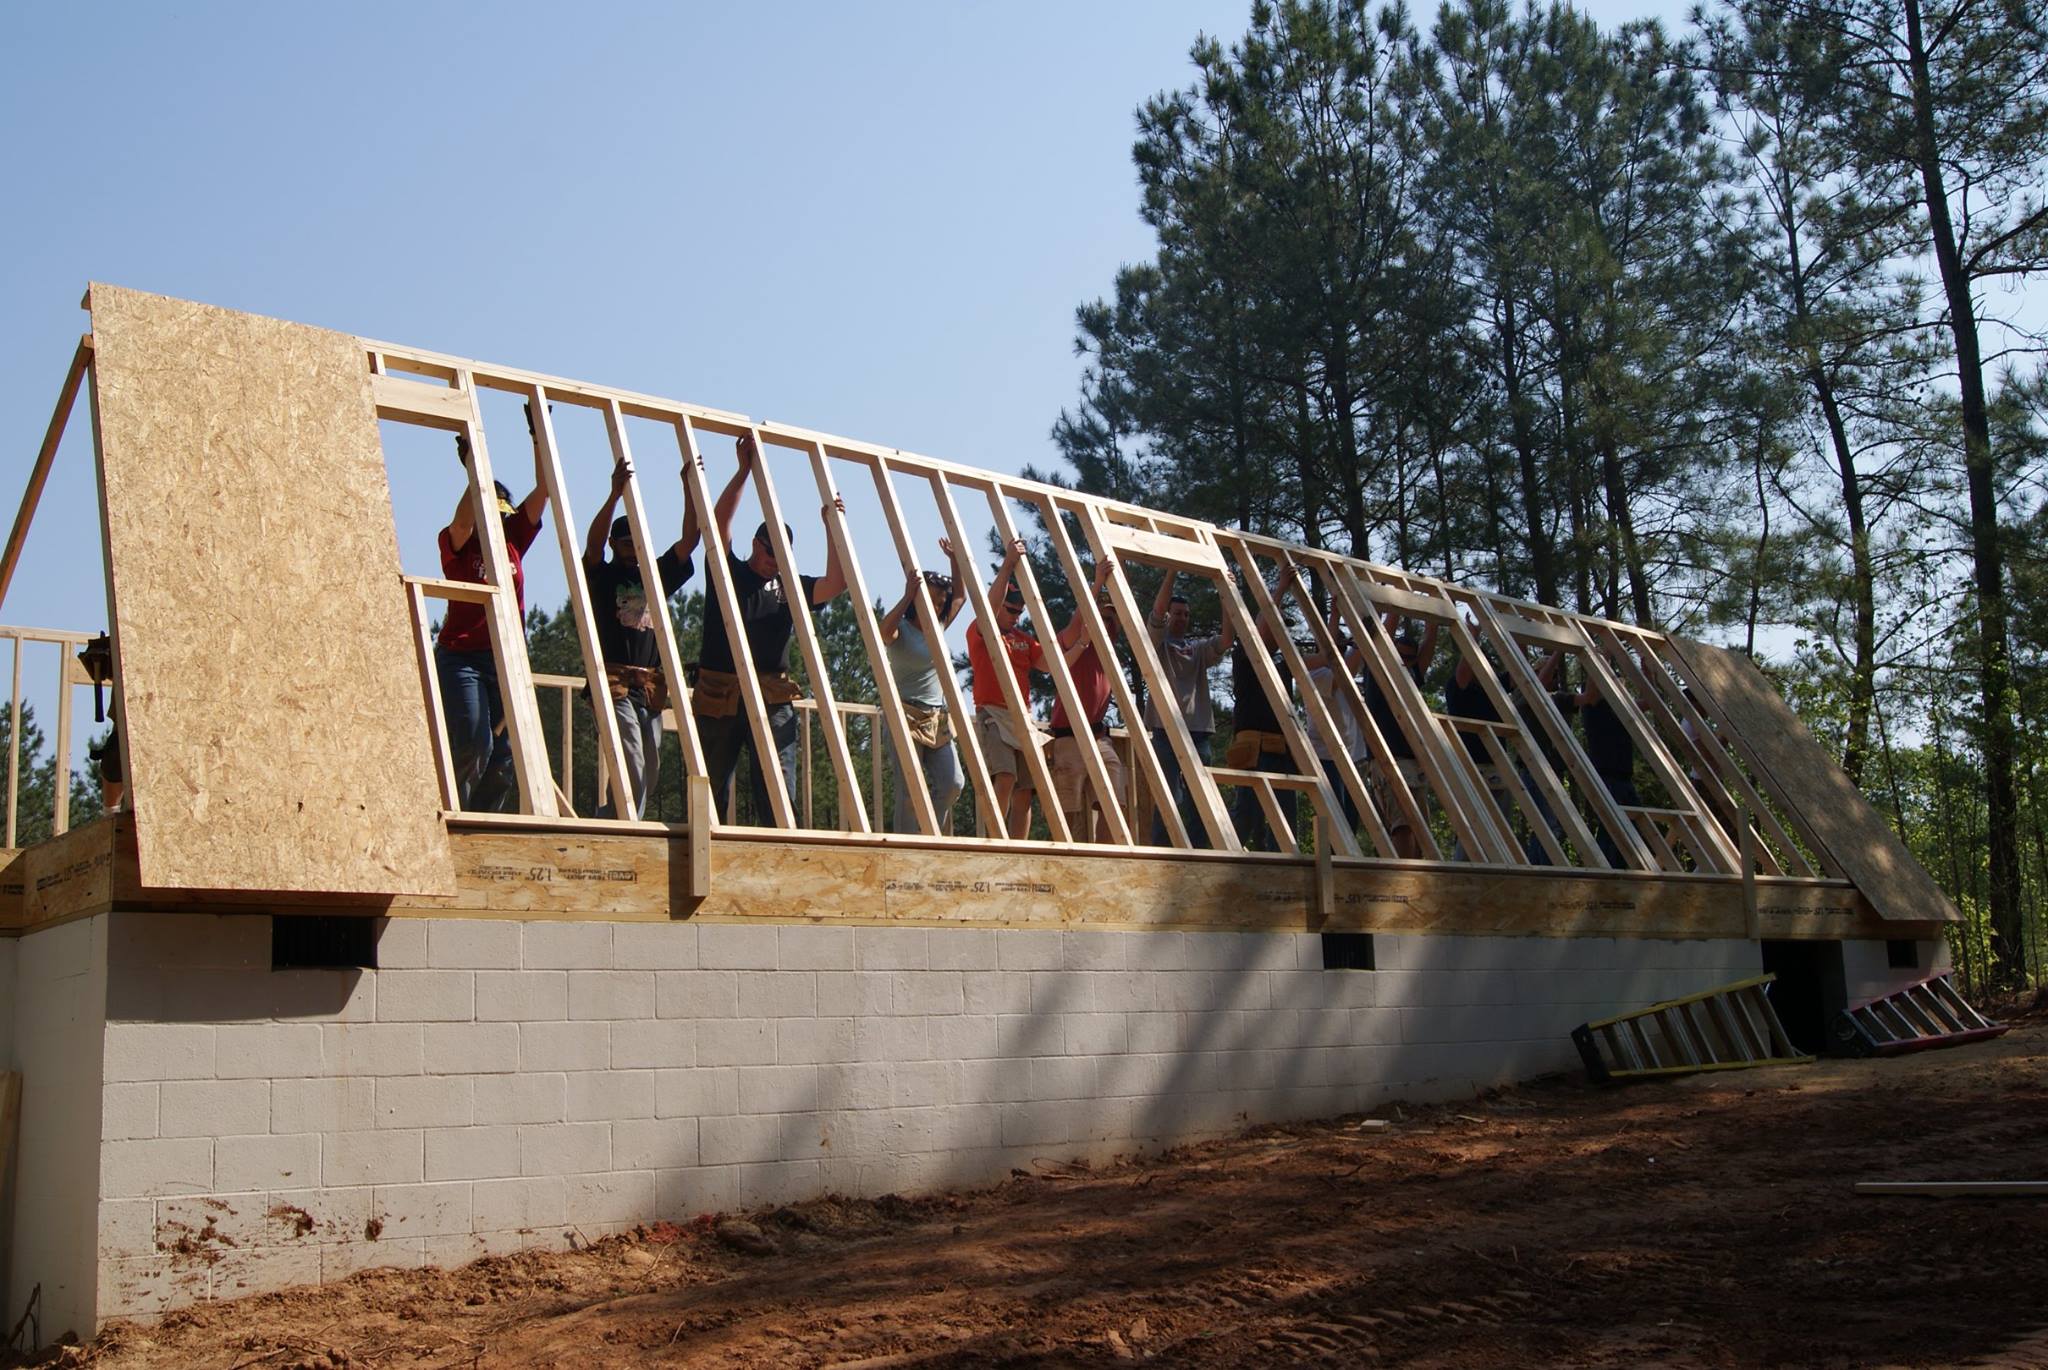 Architectural Students Raising a Building Frame